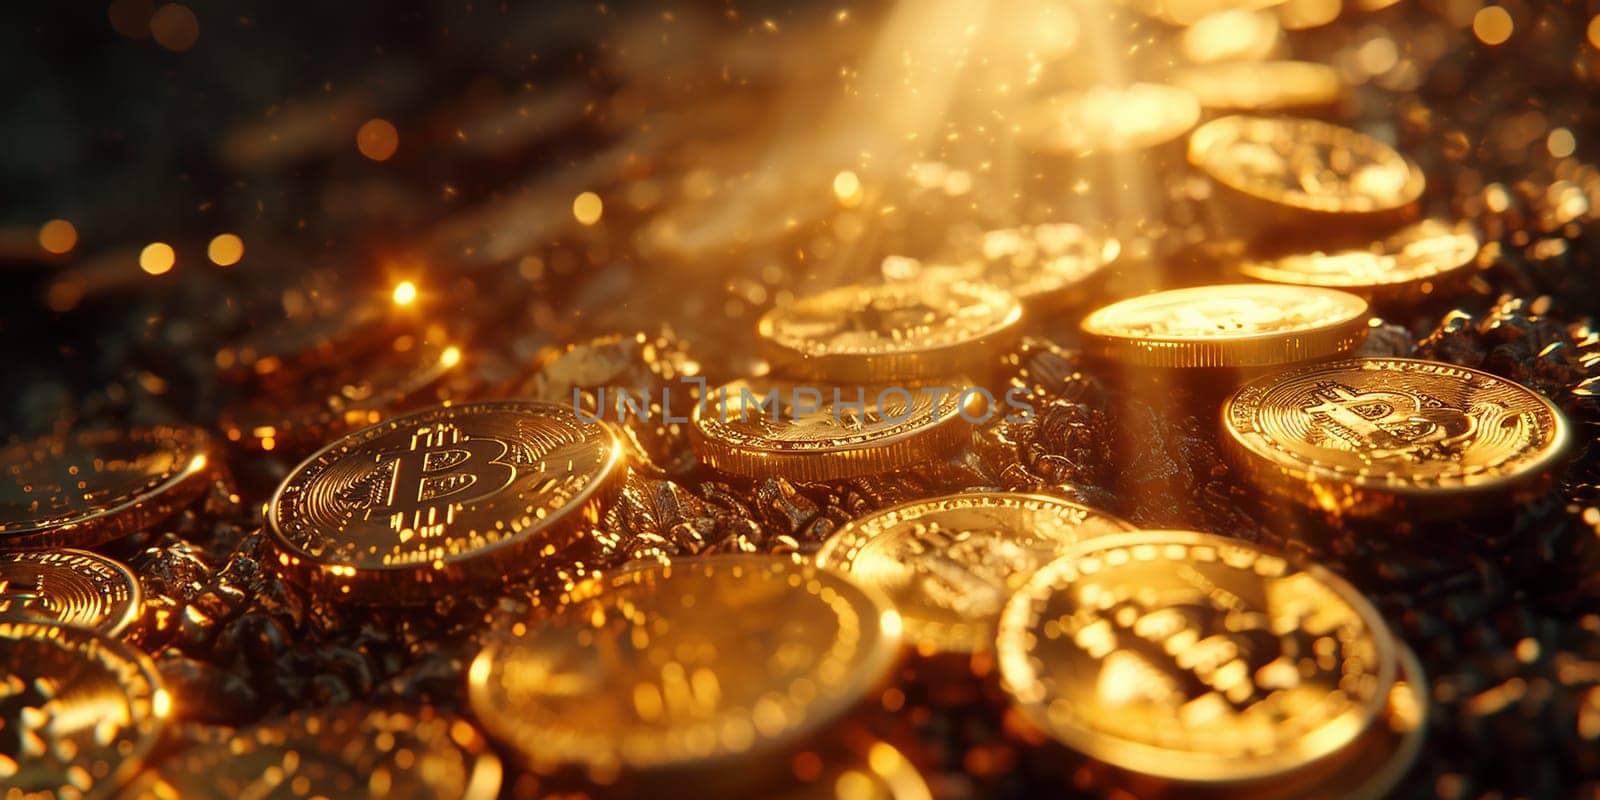 Golden bitcoin on yellow gold placer surface. Crypto currency. Bitcoin mining concept. High quality photo